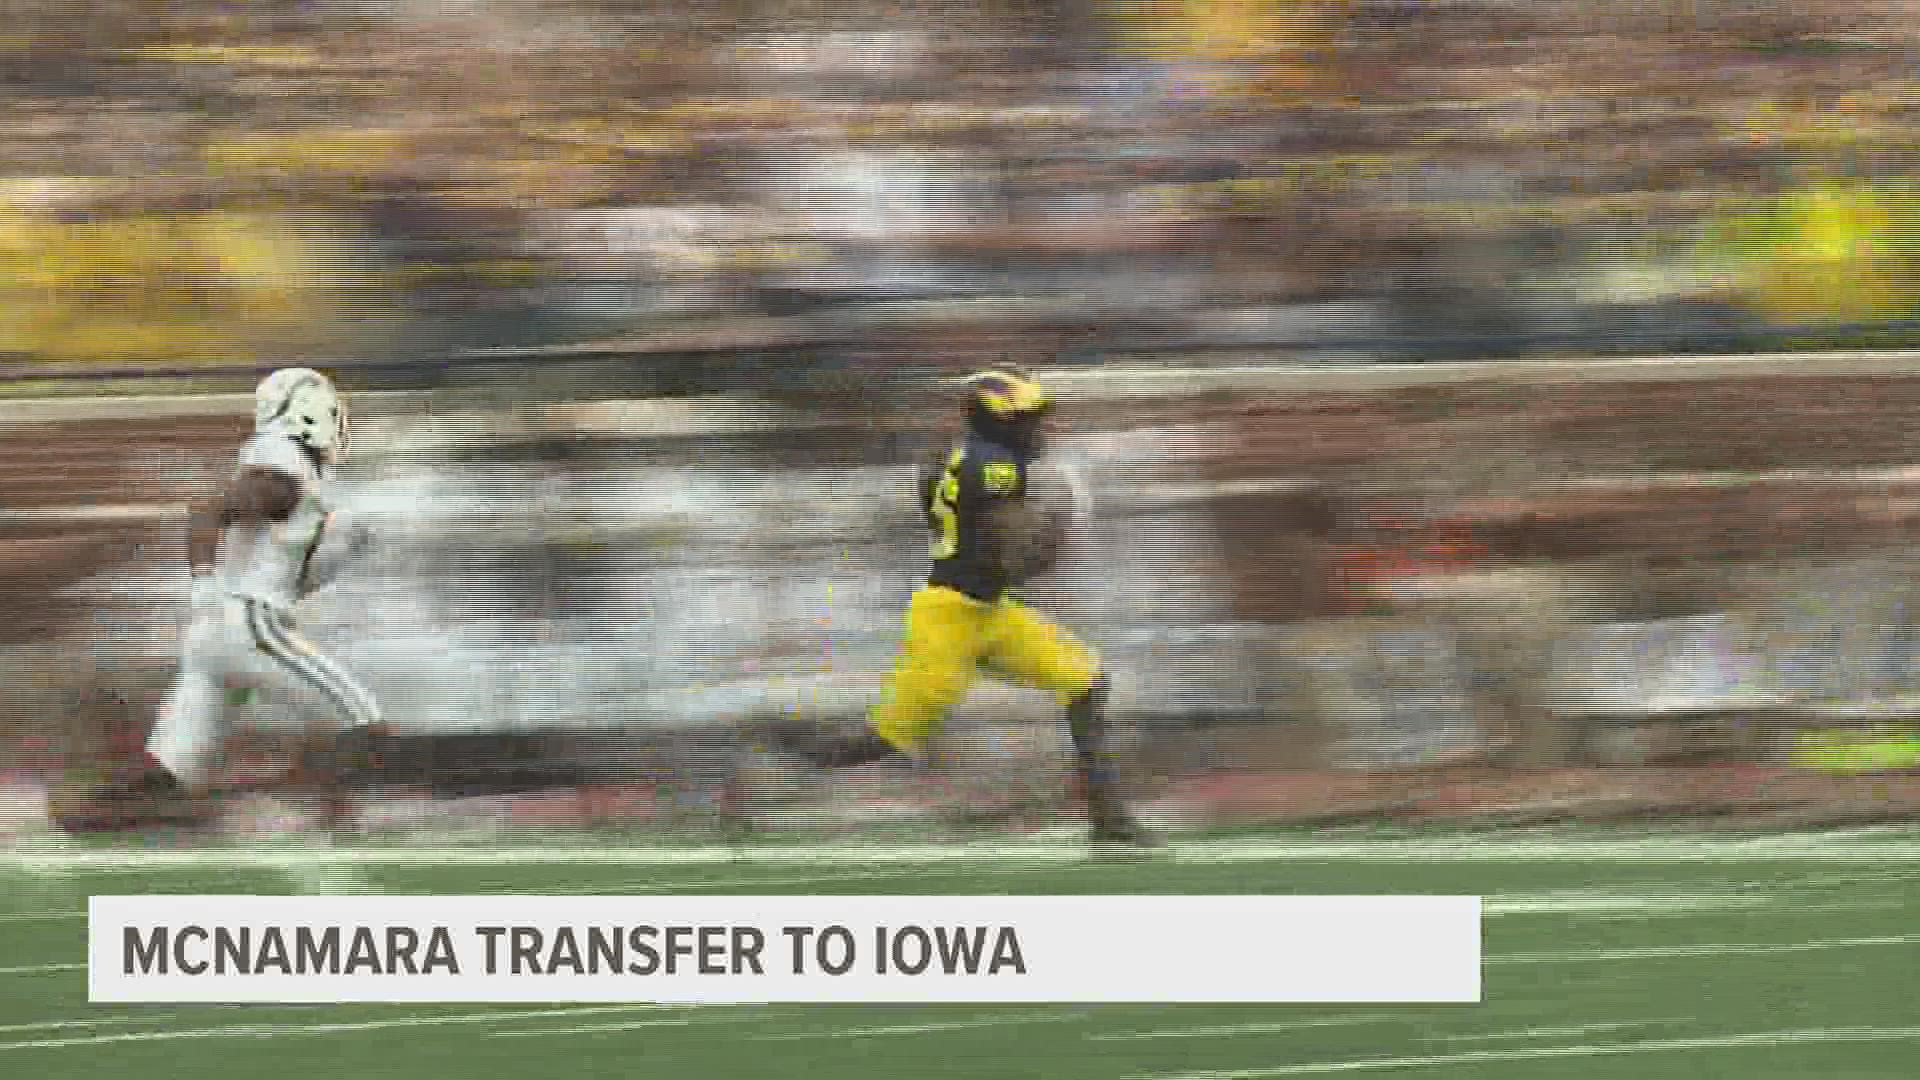 The Iowa football program added quarterback Cade McNamara from the transfer portal on Thursday. Iowa also lost five players to the portal, including Arland Bruce IV.